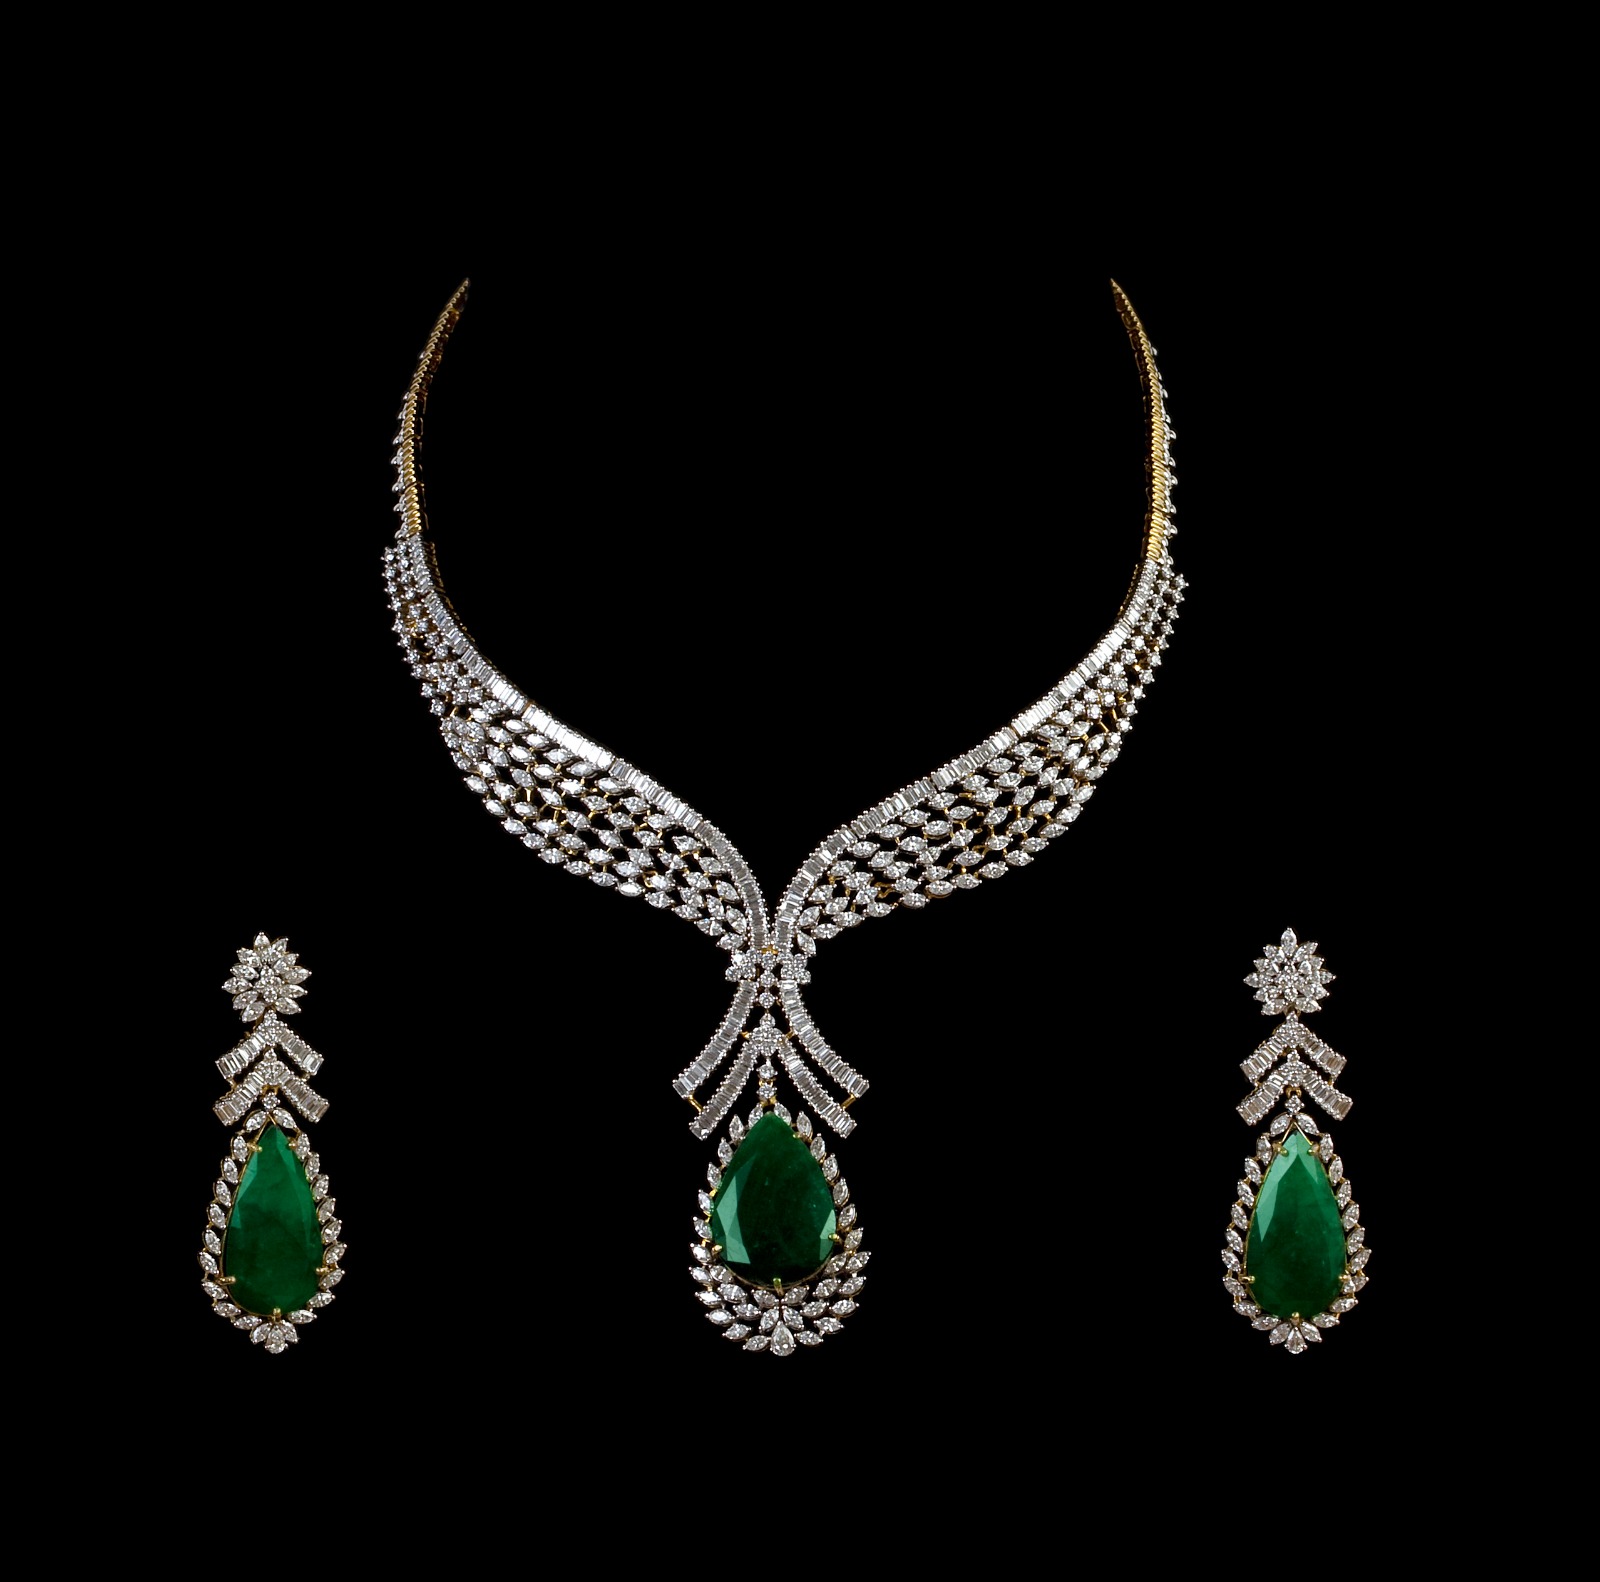 Elegant Diamond Necklace With Earrings